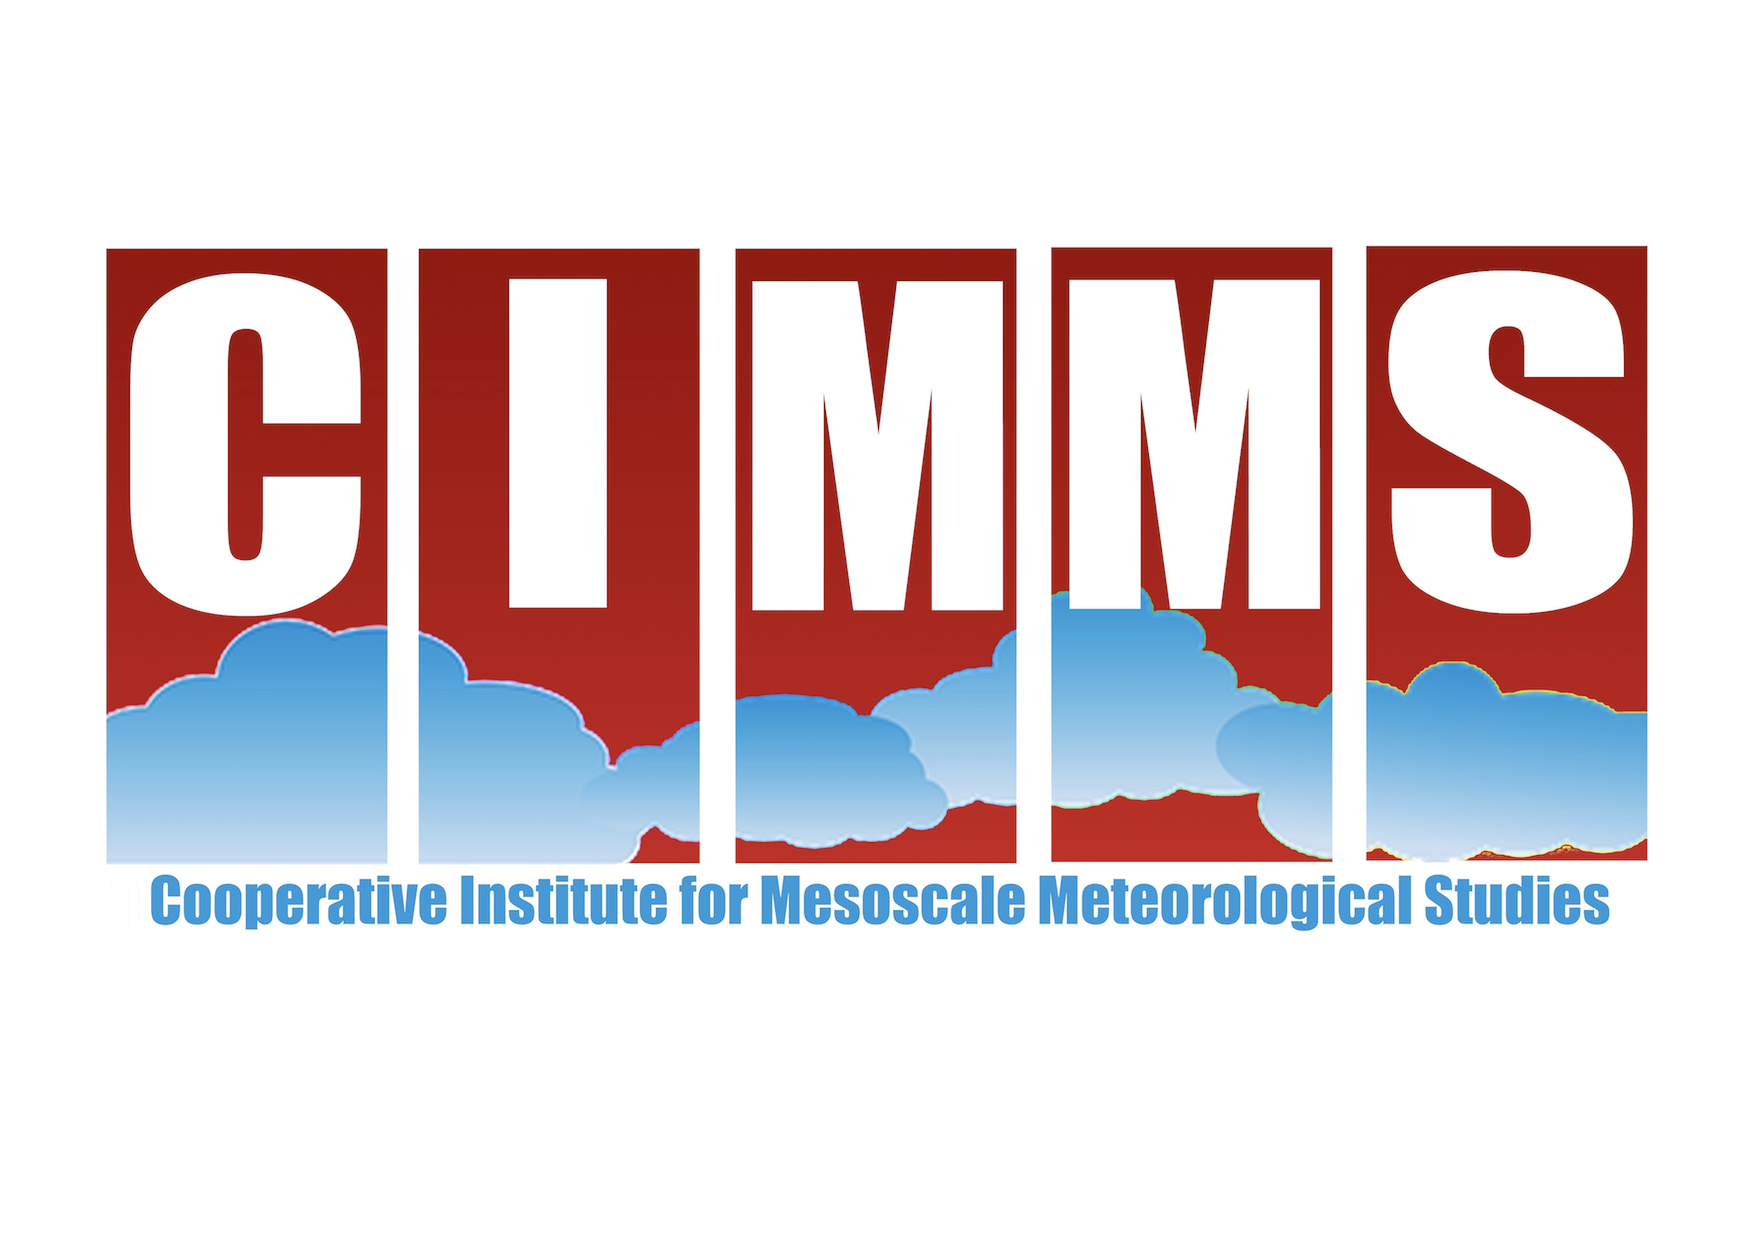 The Cooperative Institute for Mesoscale Meteorological Studies (CIMMS)